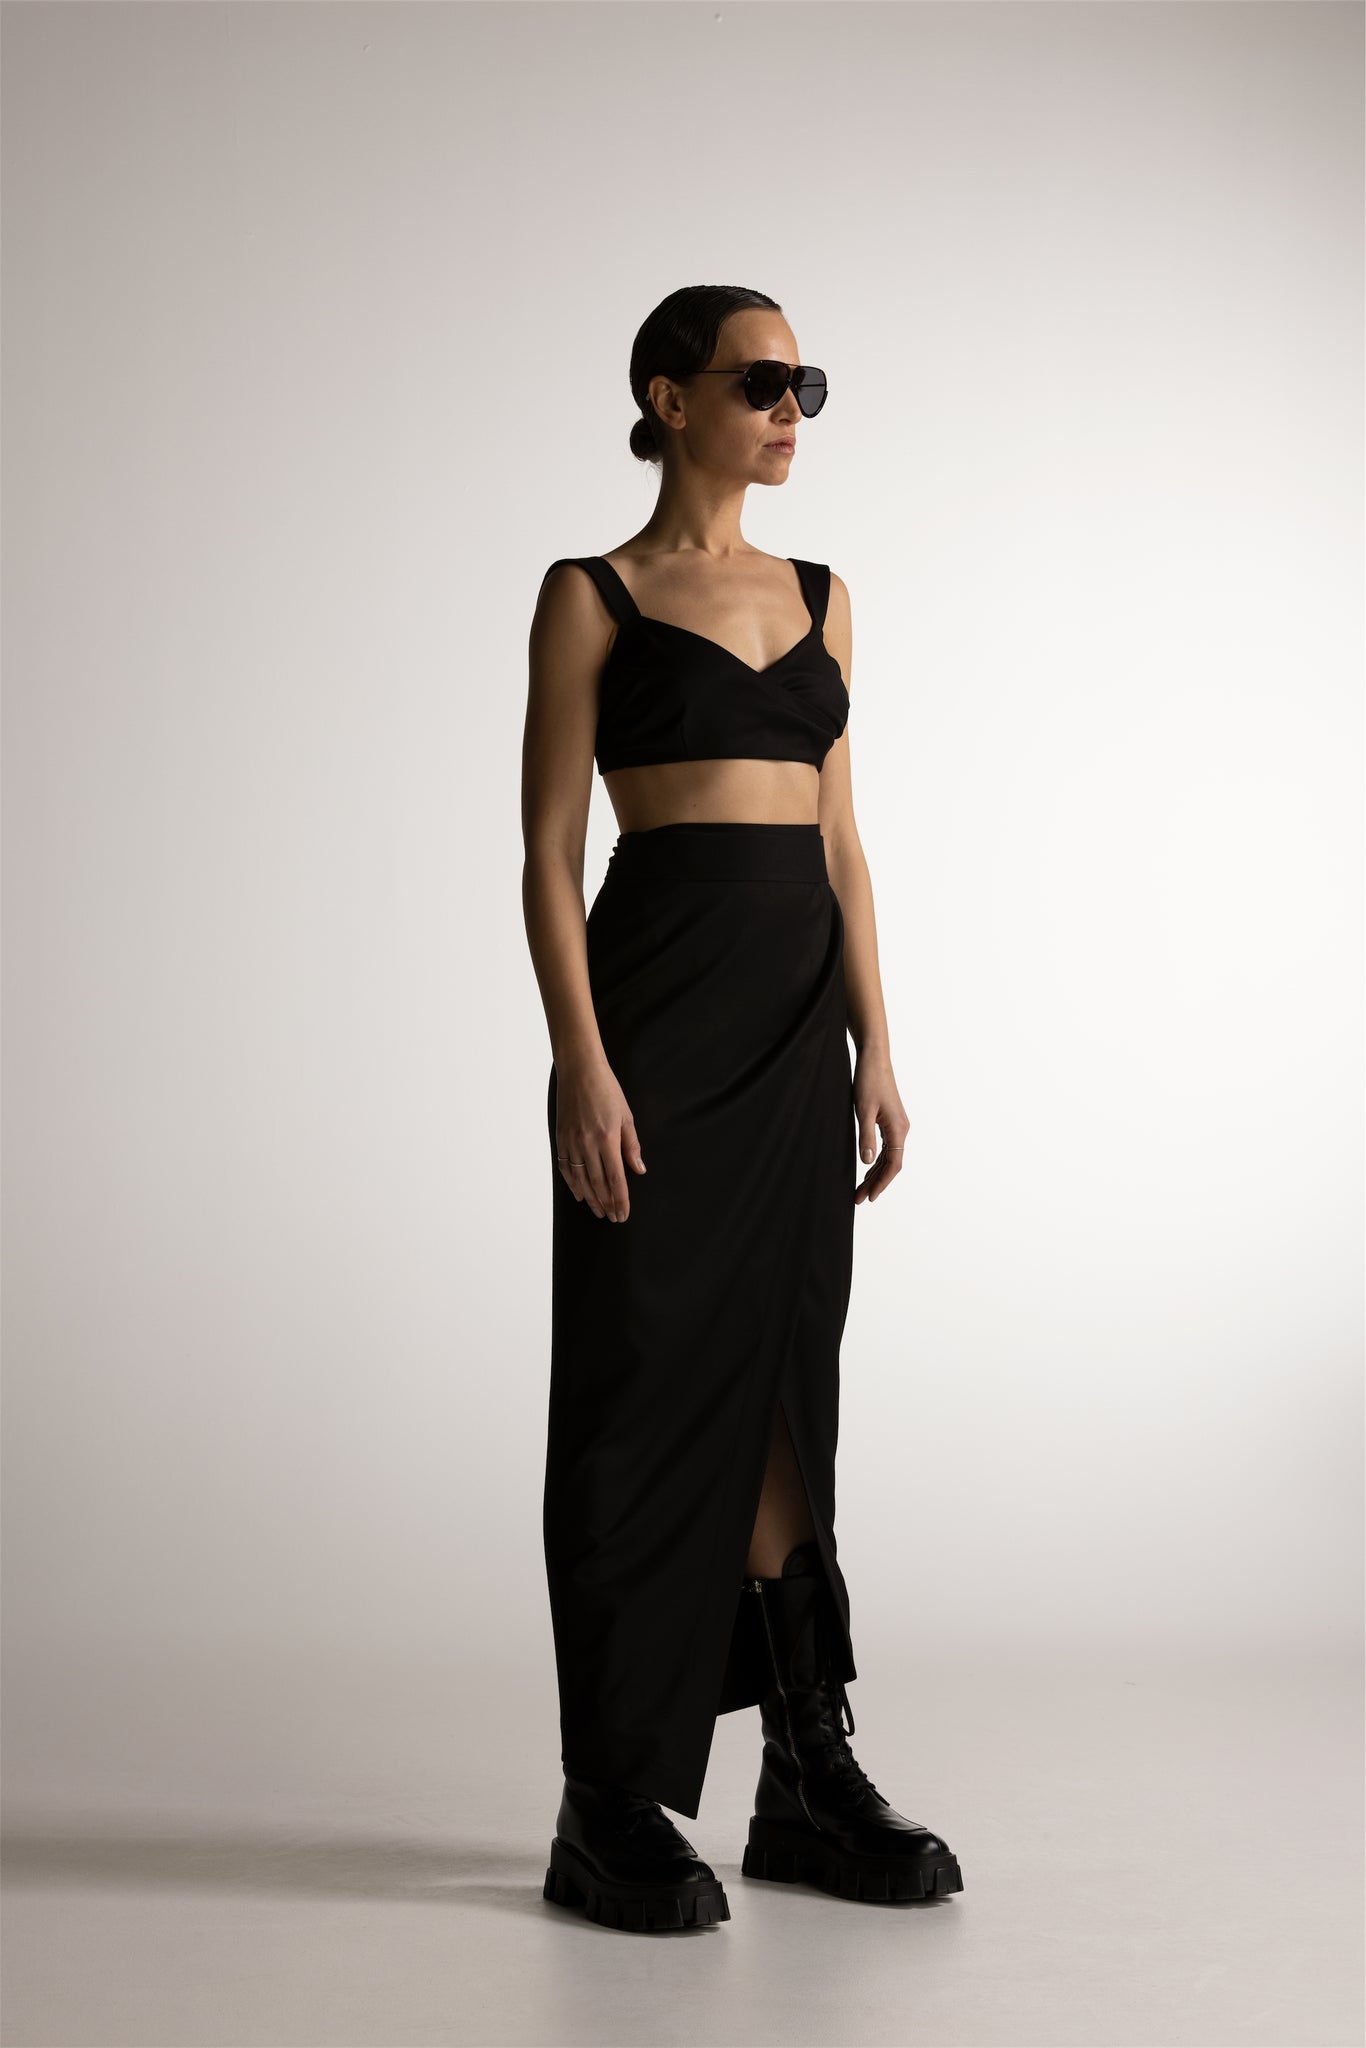 PIXIE WON'T PLAY VENERE WRAP SKIRT BLACK VERSATILE WRAP AROUND DESIGN FLATTERING SILHOUETTE EFFORTLESS STYLE TRENDY COMFORTABLE CHIC FEMININE ADJUSTABLE FIT DAY TO NIGHT WEAR CASUAL ELEGANCE SPRING SUMMER FALL WINTER CAPSULE COLLECTION ESSENTIAL LUXURY HIGH WAISTED DOUBLE WRAP